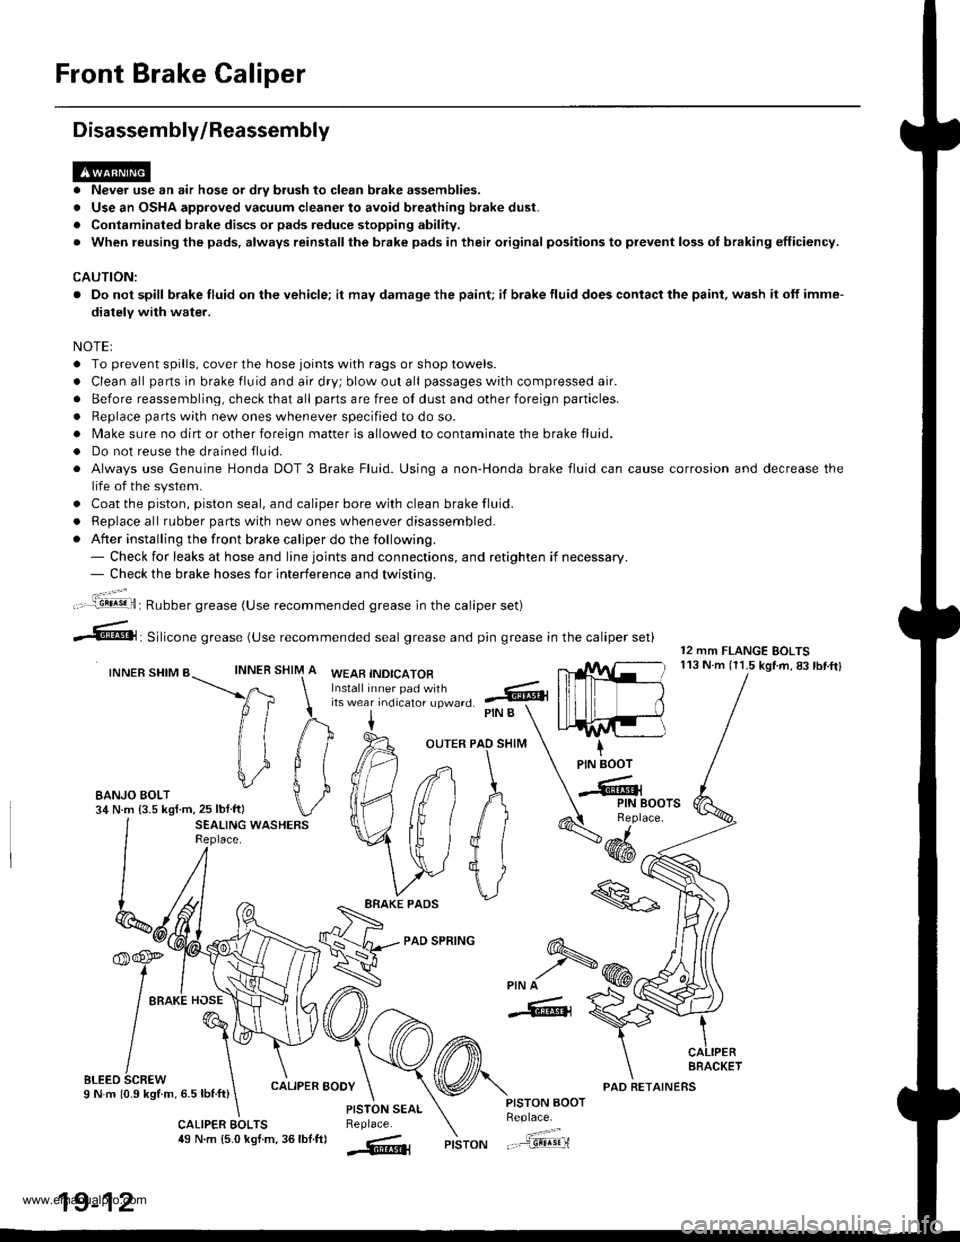 HONDA CR-V 1997 RD1-RD3 / 1.G Owners Manual 
Front Brake Caliper
Disassembly/Reassembly
. Never use an air hose or dry brush to clean brake assemblies.
. Use an OSHA approved vacuum cleaner to avoid breathing brake dust.
. Contaminated brake di